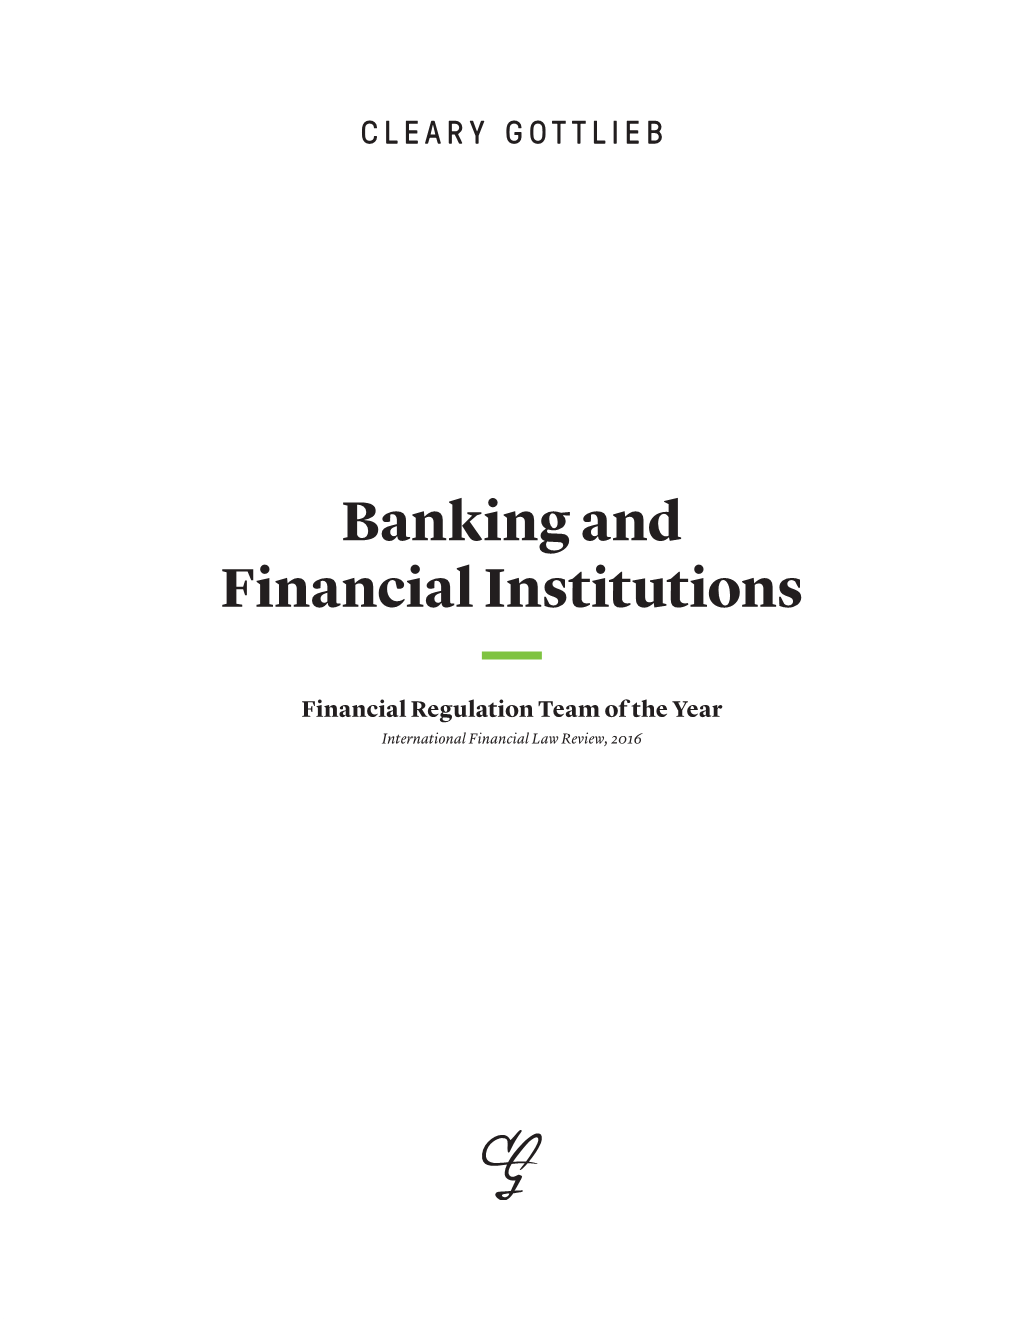 Cleary Gottlieb's Banking & Financial Institutions Practice